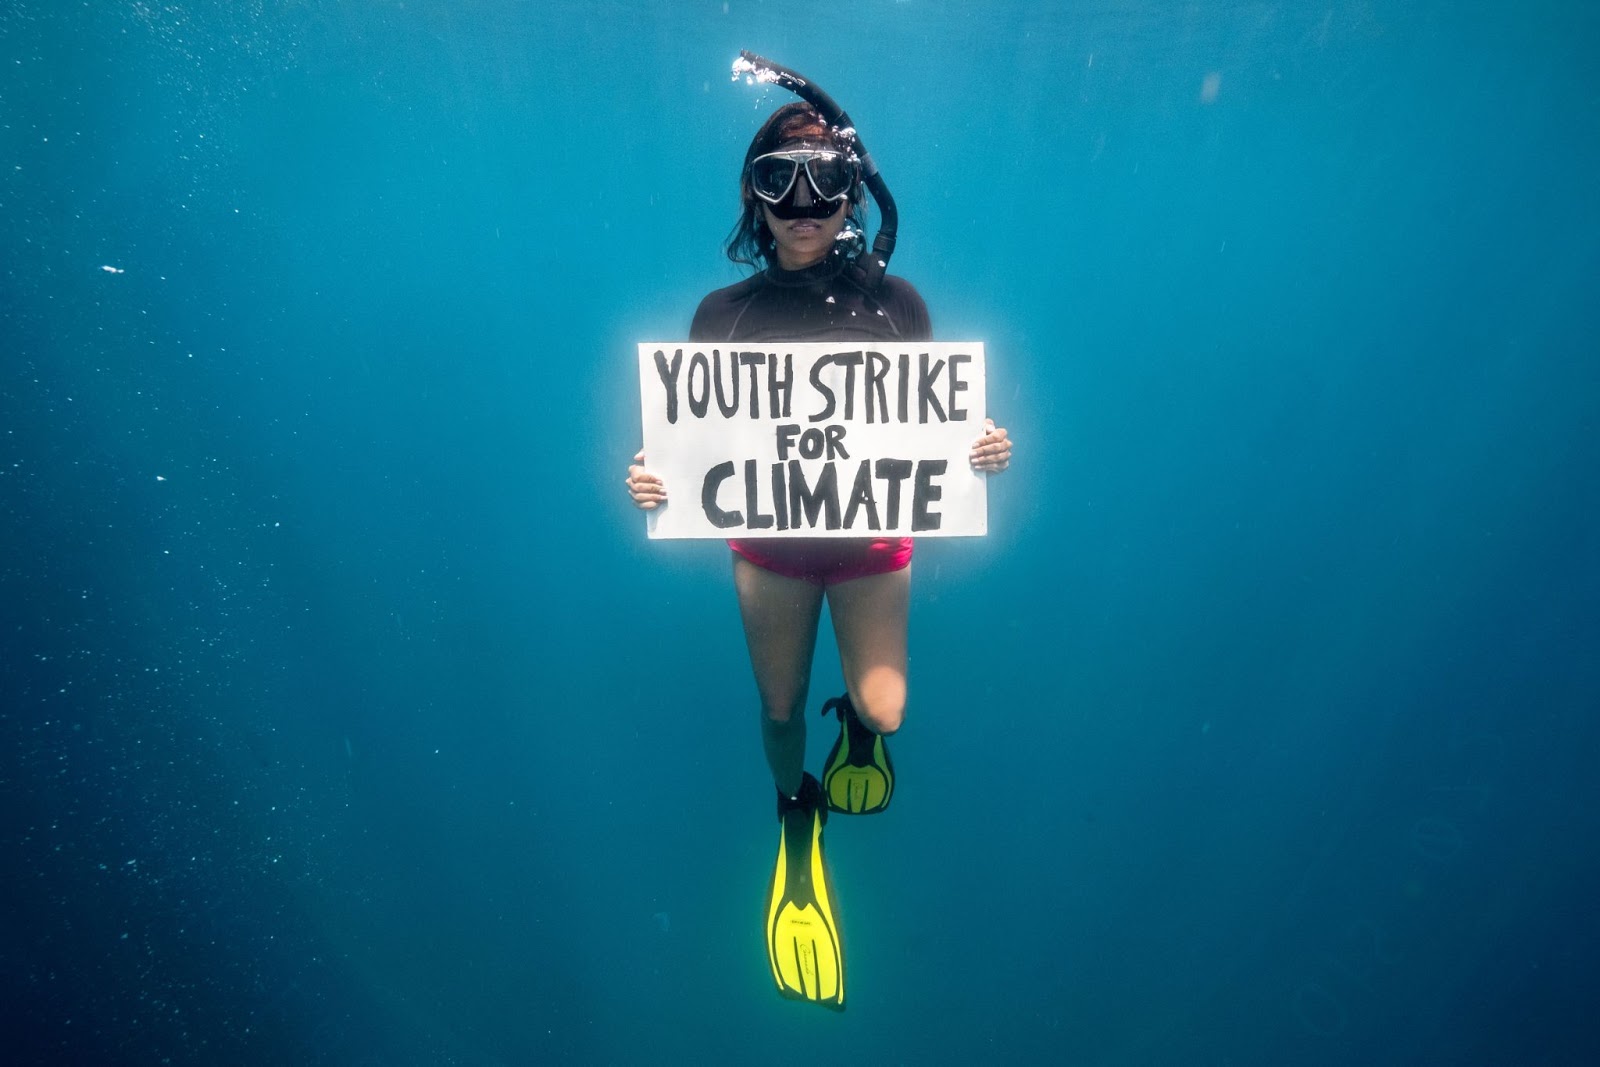 Youth strike for climate